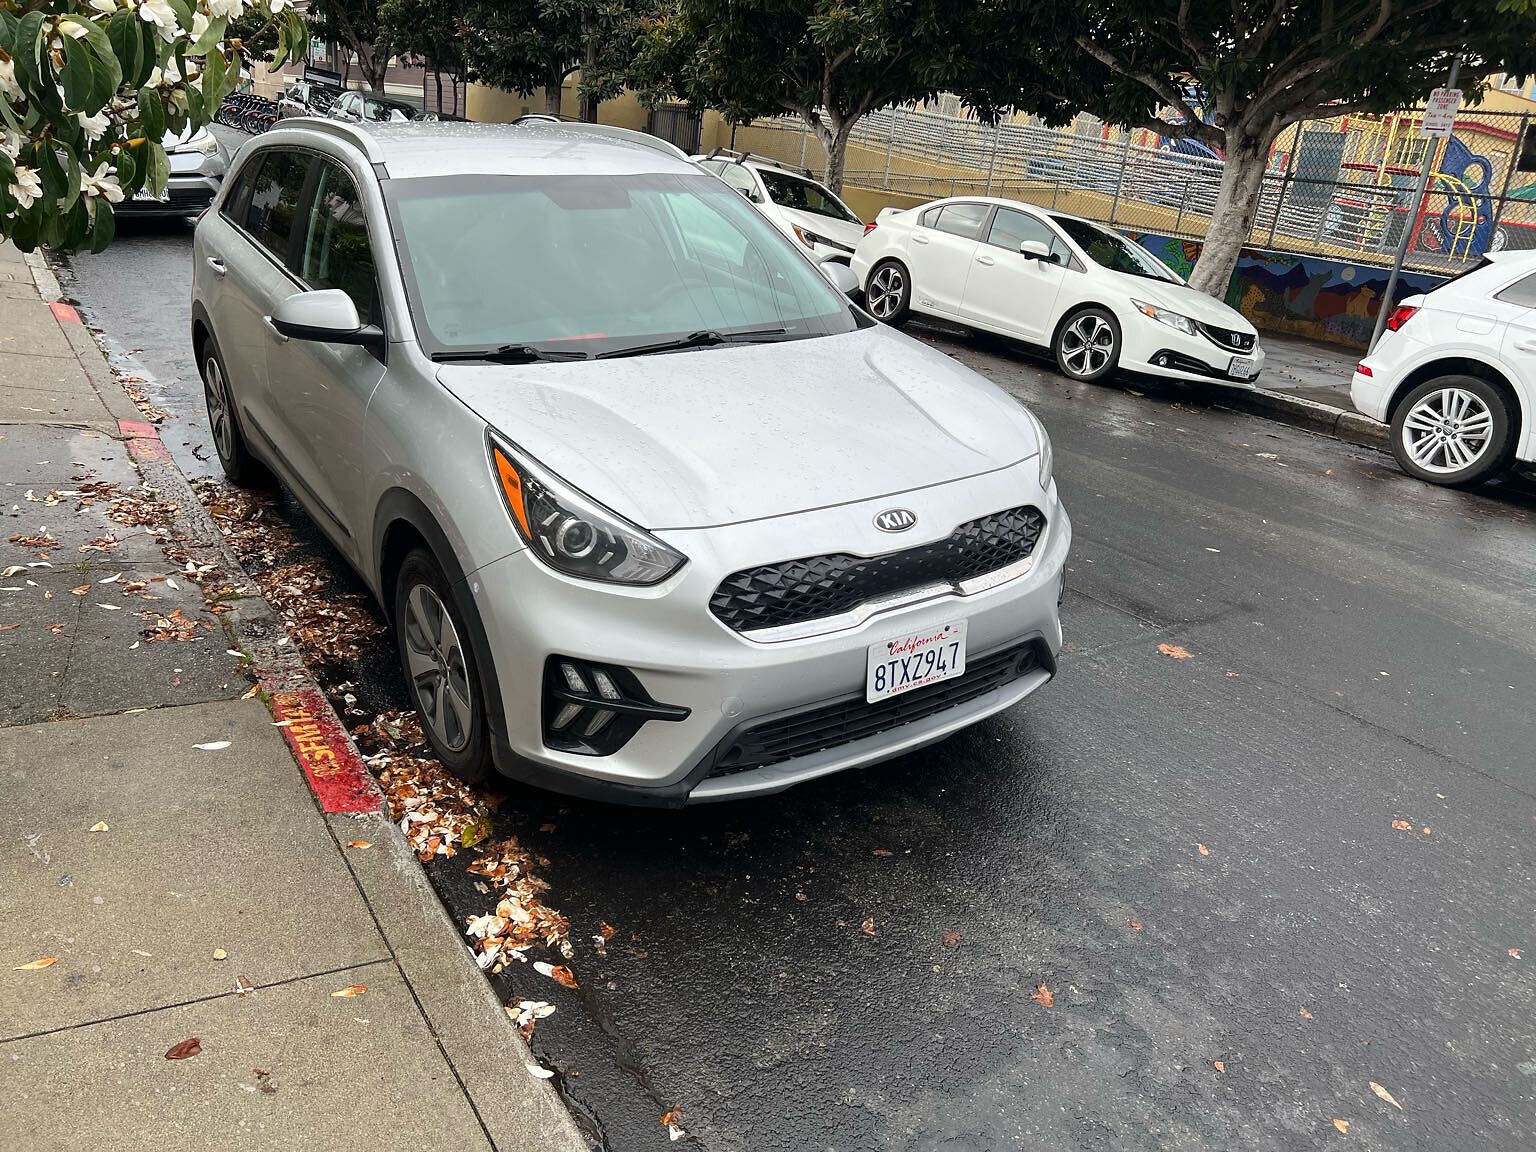 Photo of car in the street with license plate 8TXZ947 in California